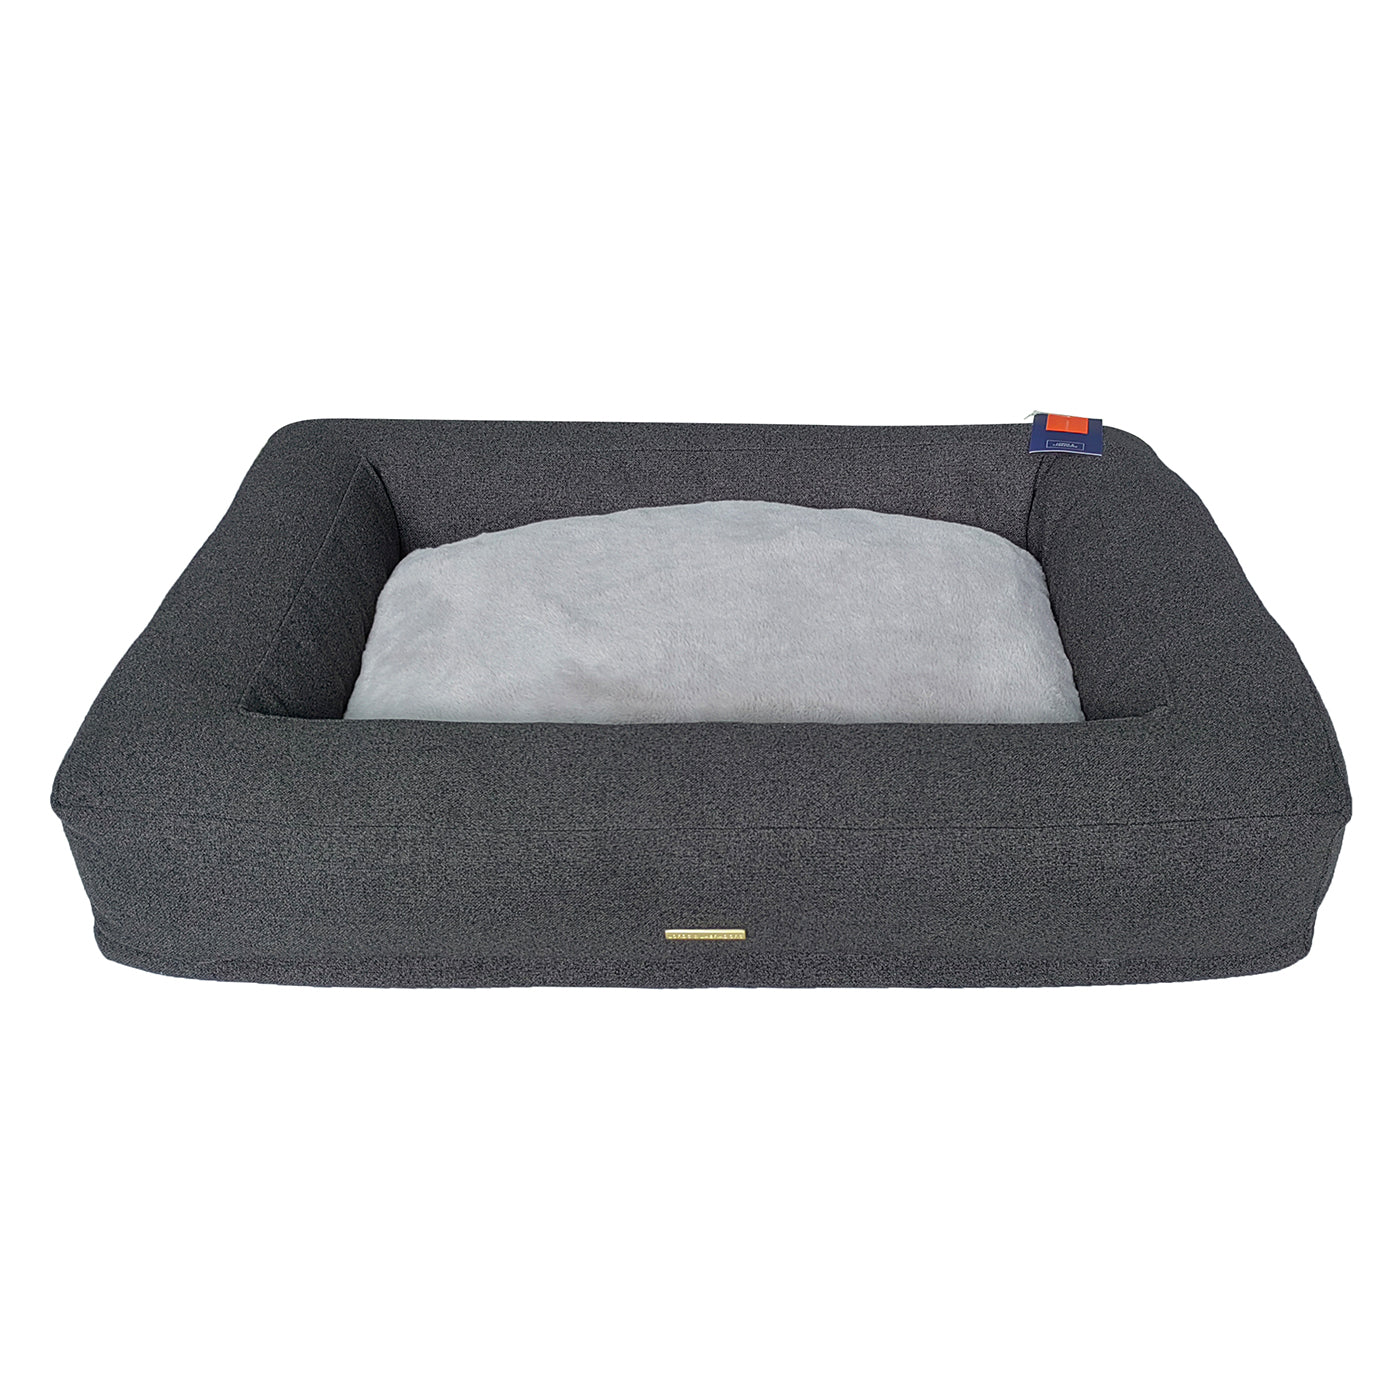 Discover Our Luxurious Comfort Cube Dog Bed in Anthracite (Navy), featuring Removable covers for easy machine washing and a non slip wipeable base. This super soft pet bed offers the ultimate comfort to your furry friend! Bringing Your Canine Companion The Perfect Bed For Dogs To Curl Up To! Available Now at Lords & Labradors US